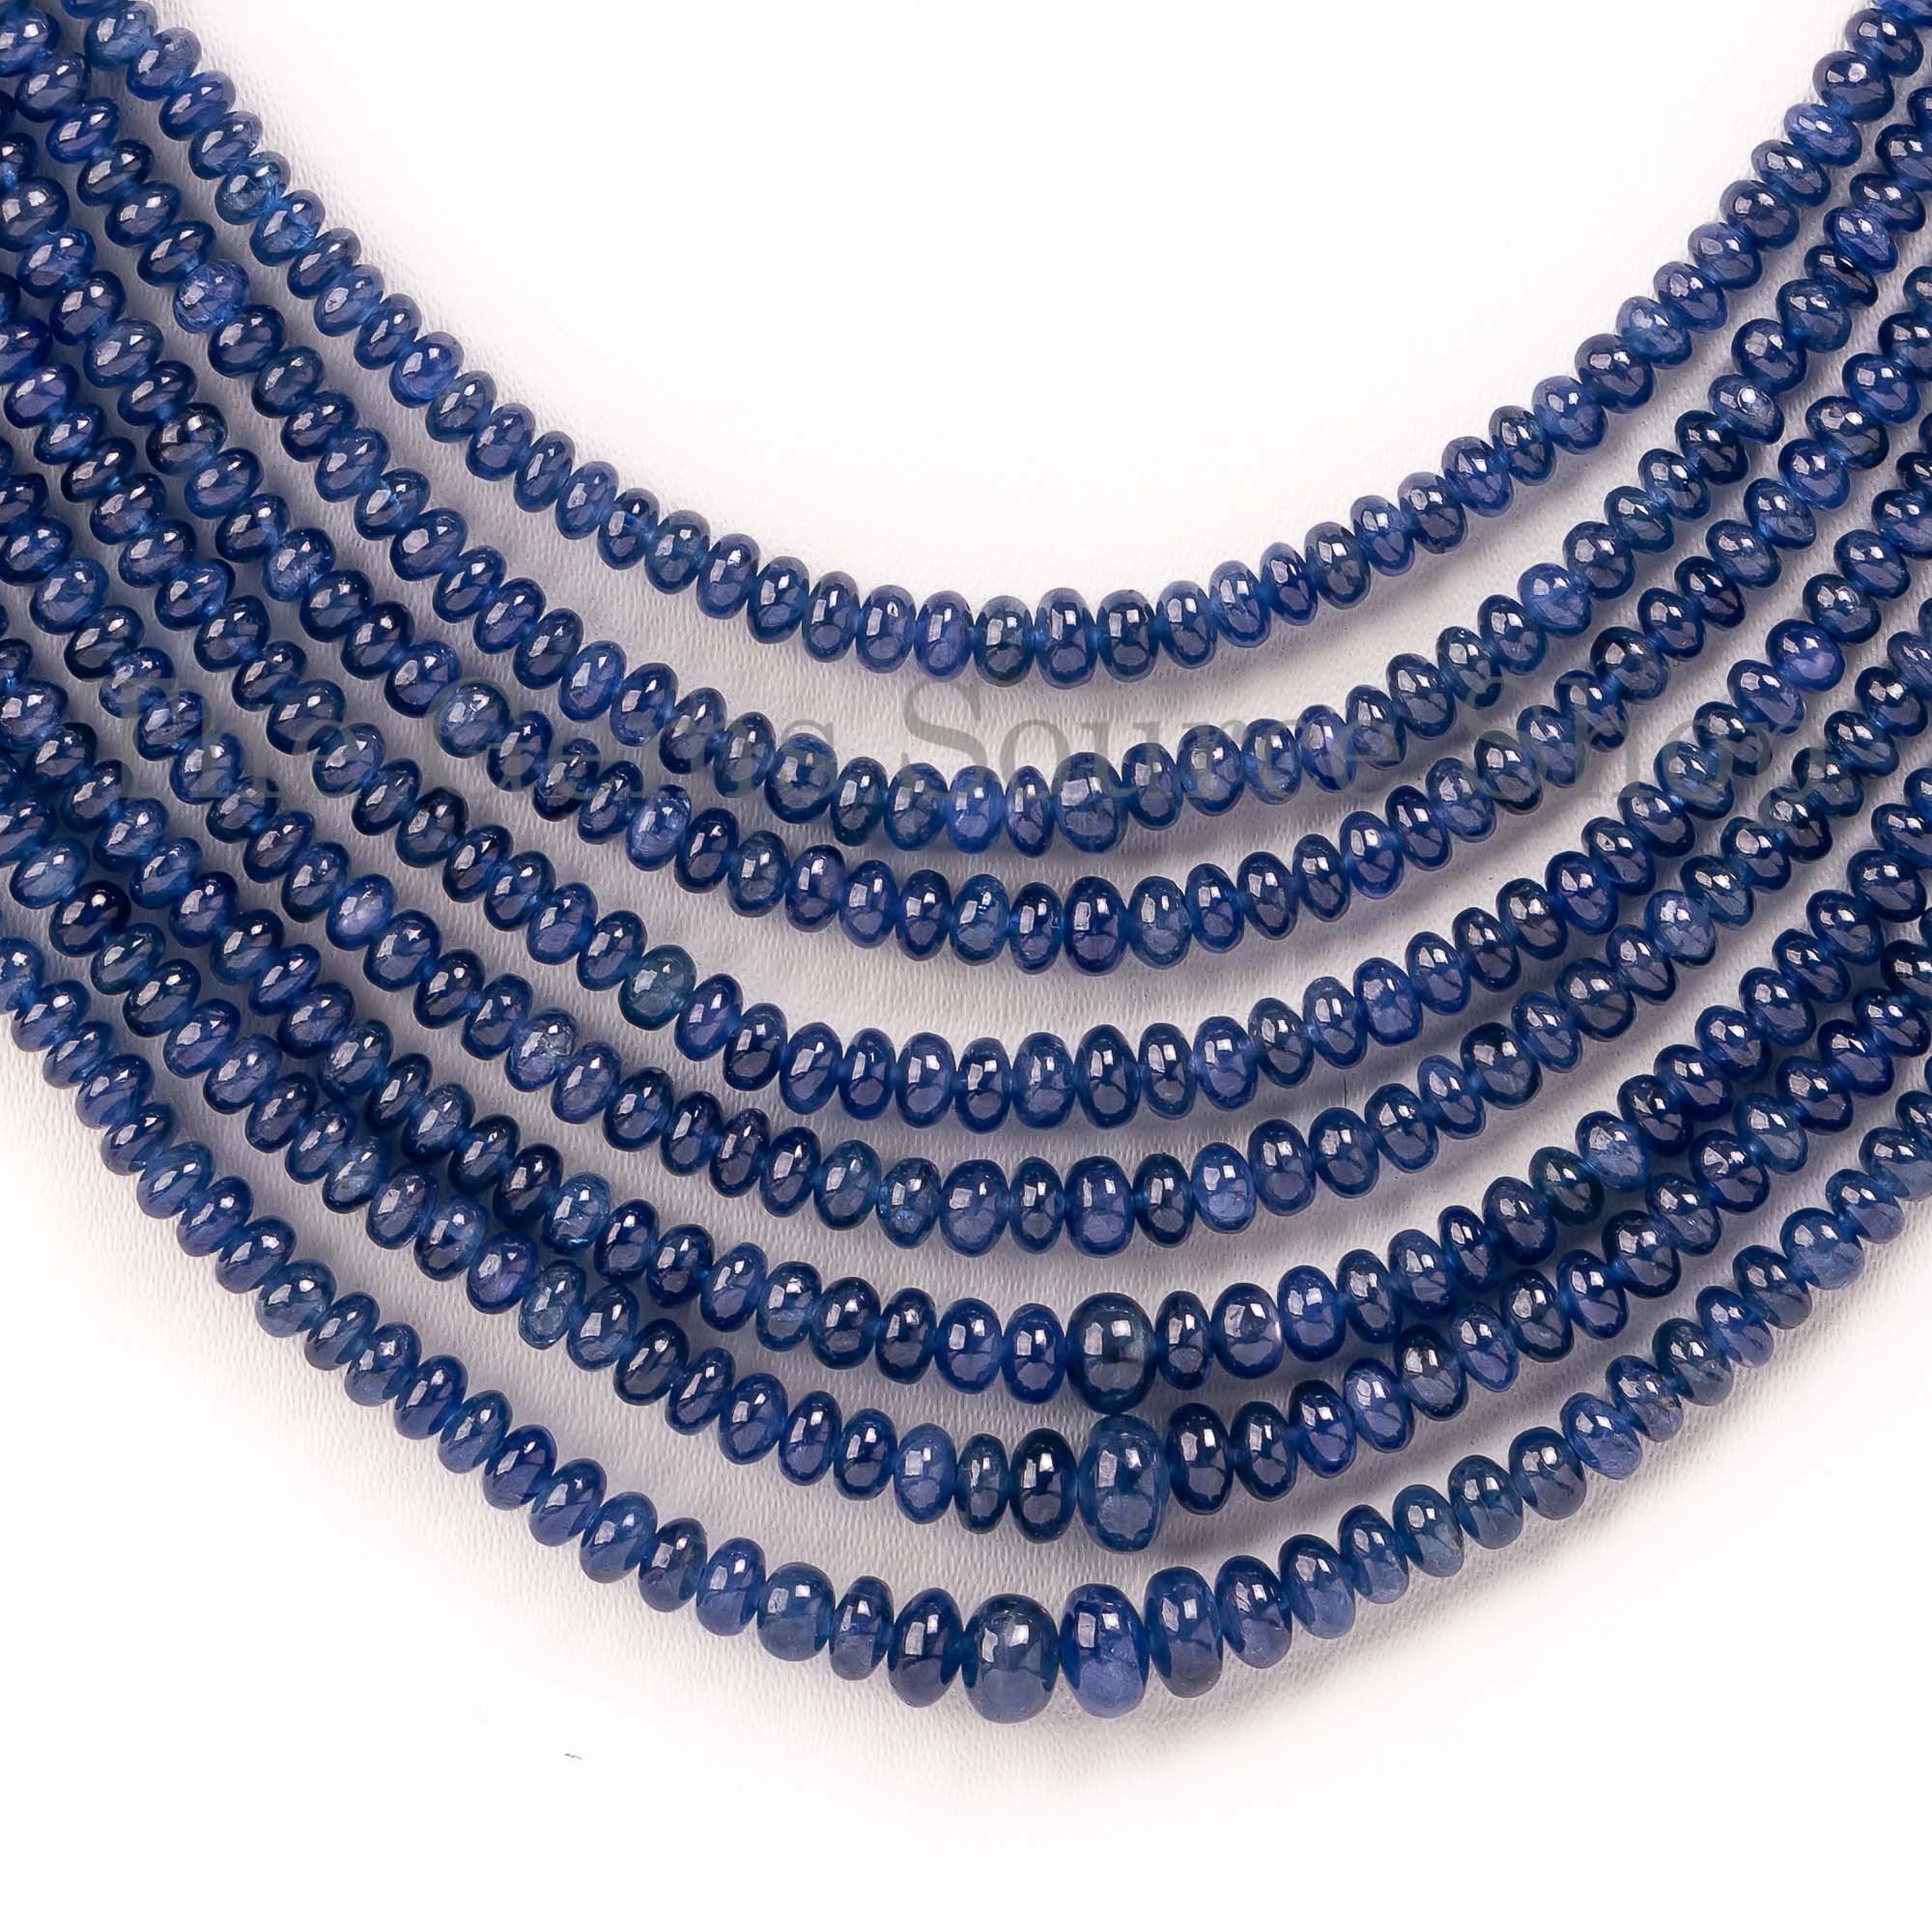 Blue Sapphire 3.5-5mm Faceted Rondelle AA Grade Gemstone Beads Lot - 154664